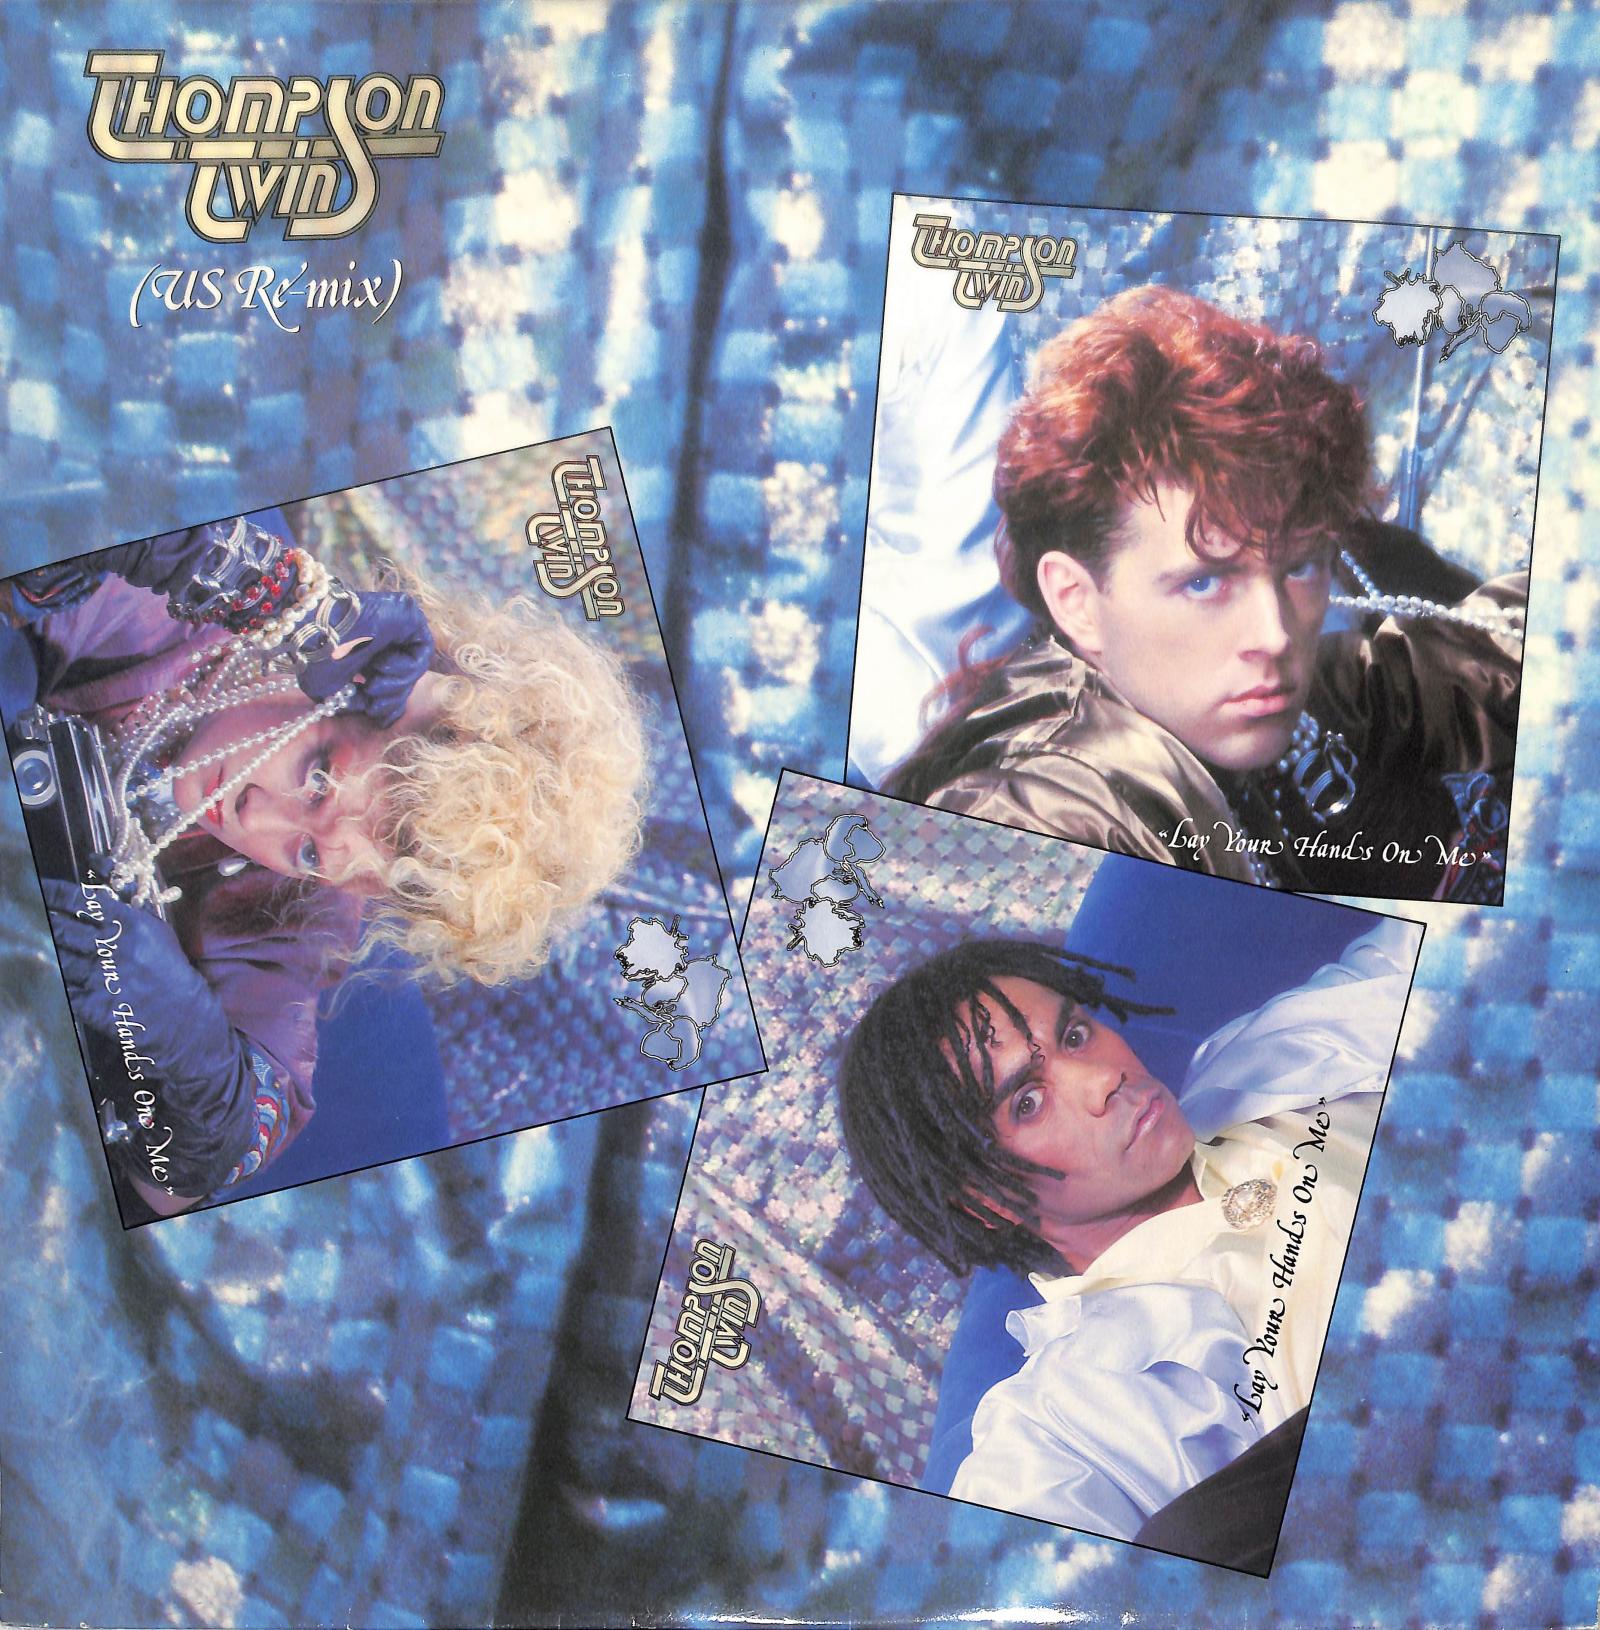 THOMPSON TWINS - Lay Your Hands On Me (US Re-Mix)